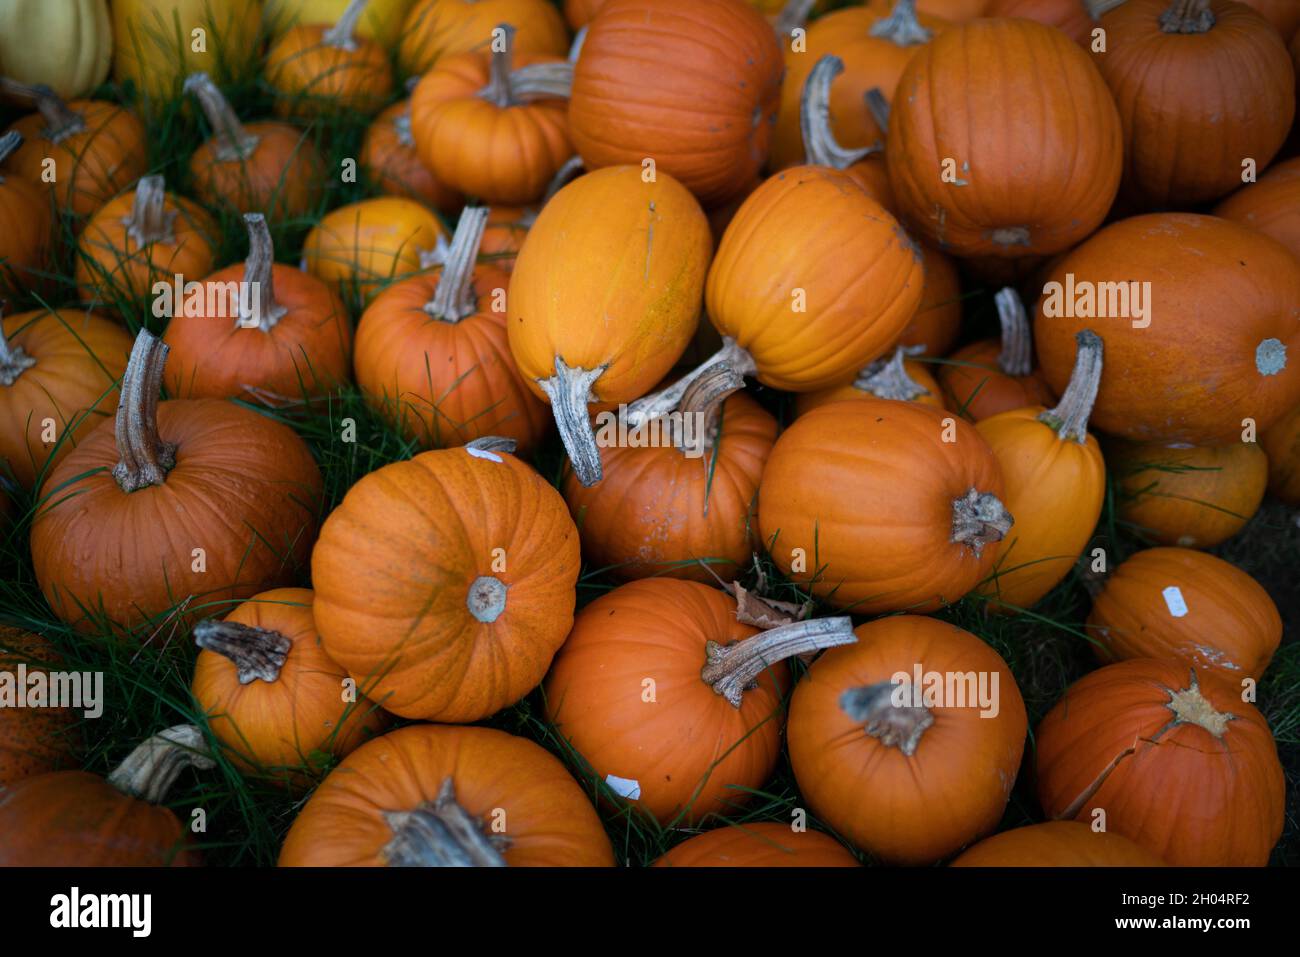 Many orange Pumpkins stacked different sizes Stock Photo